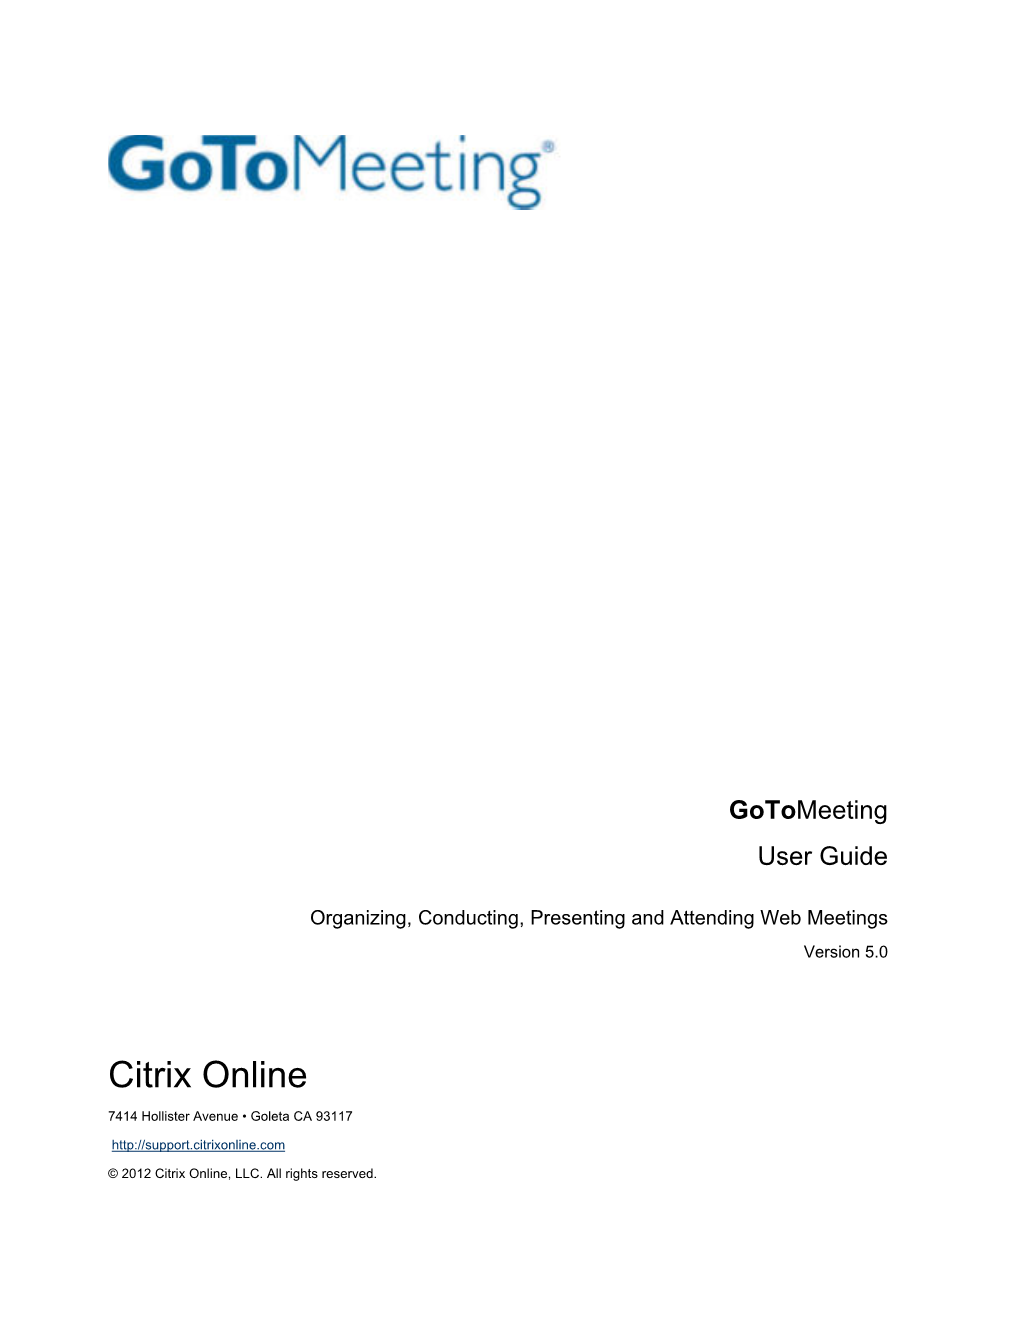 Gotomeeting User Guide